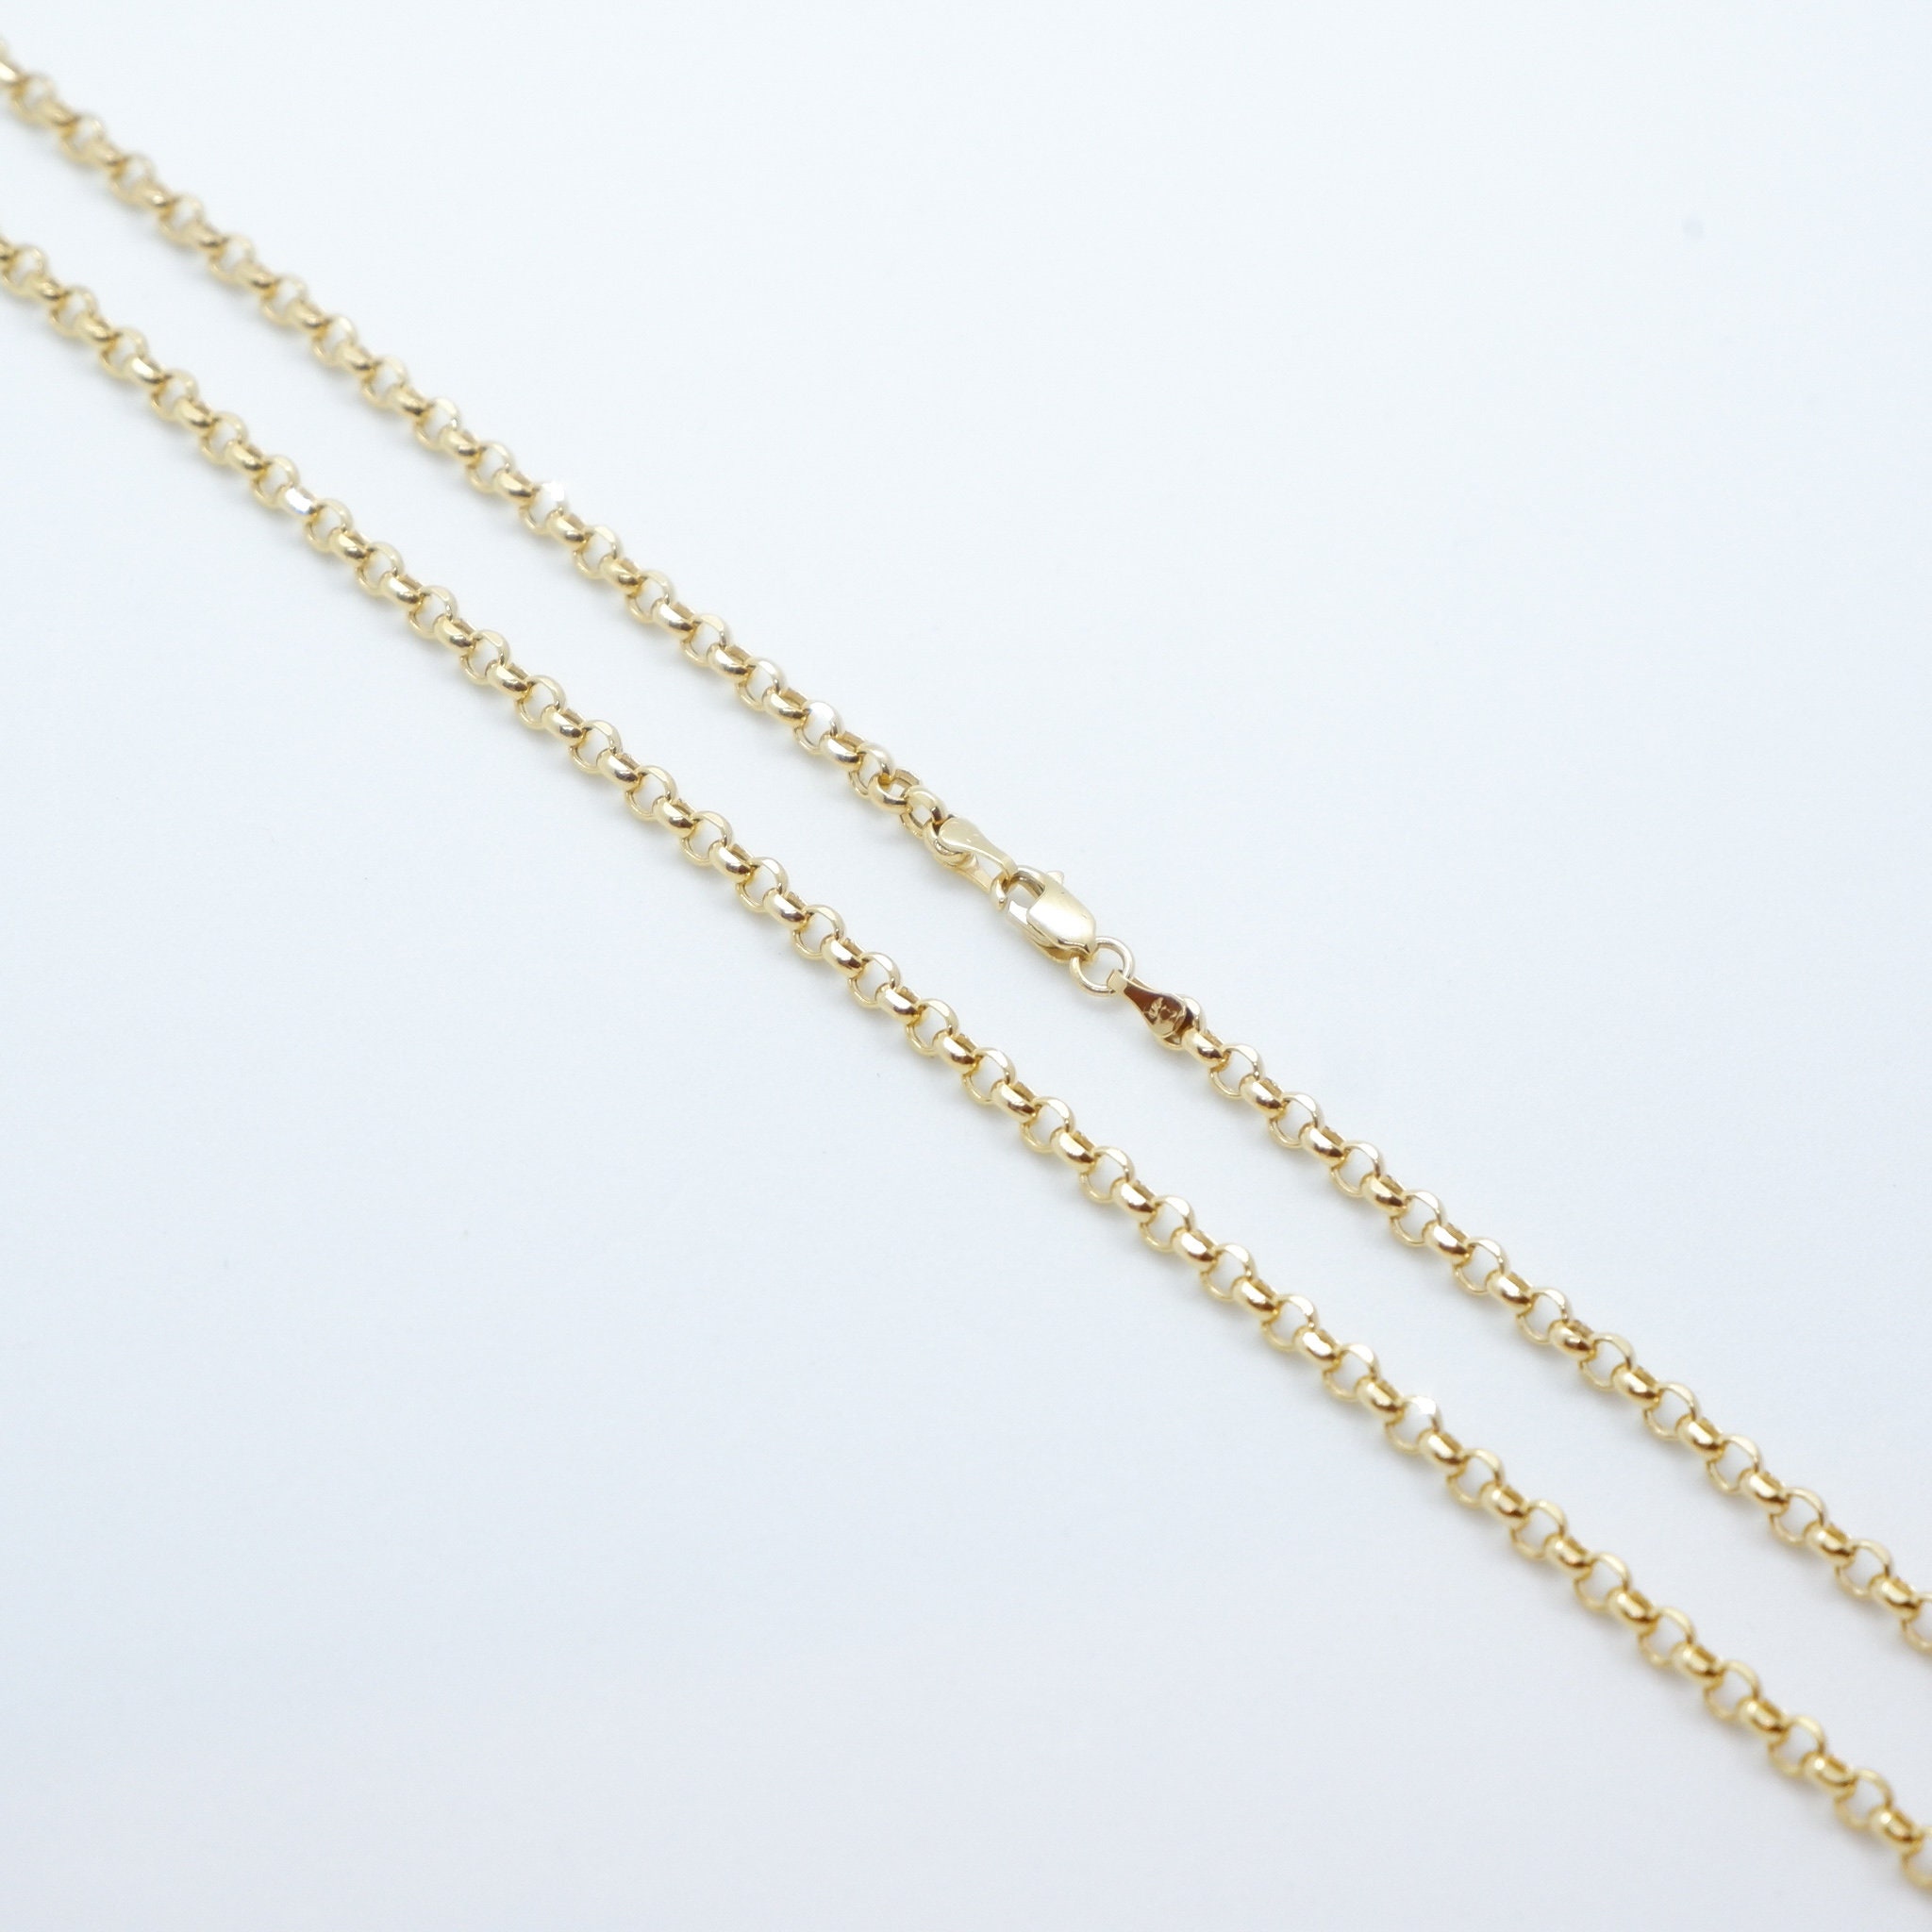 3.5mm Gold Rolo Chain Necklace 14k Solid Yellow Gold Diamond - Etsy